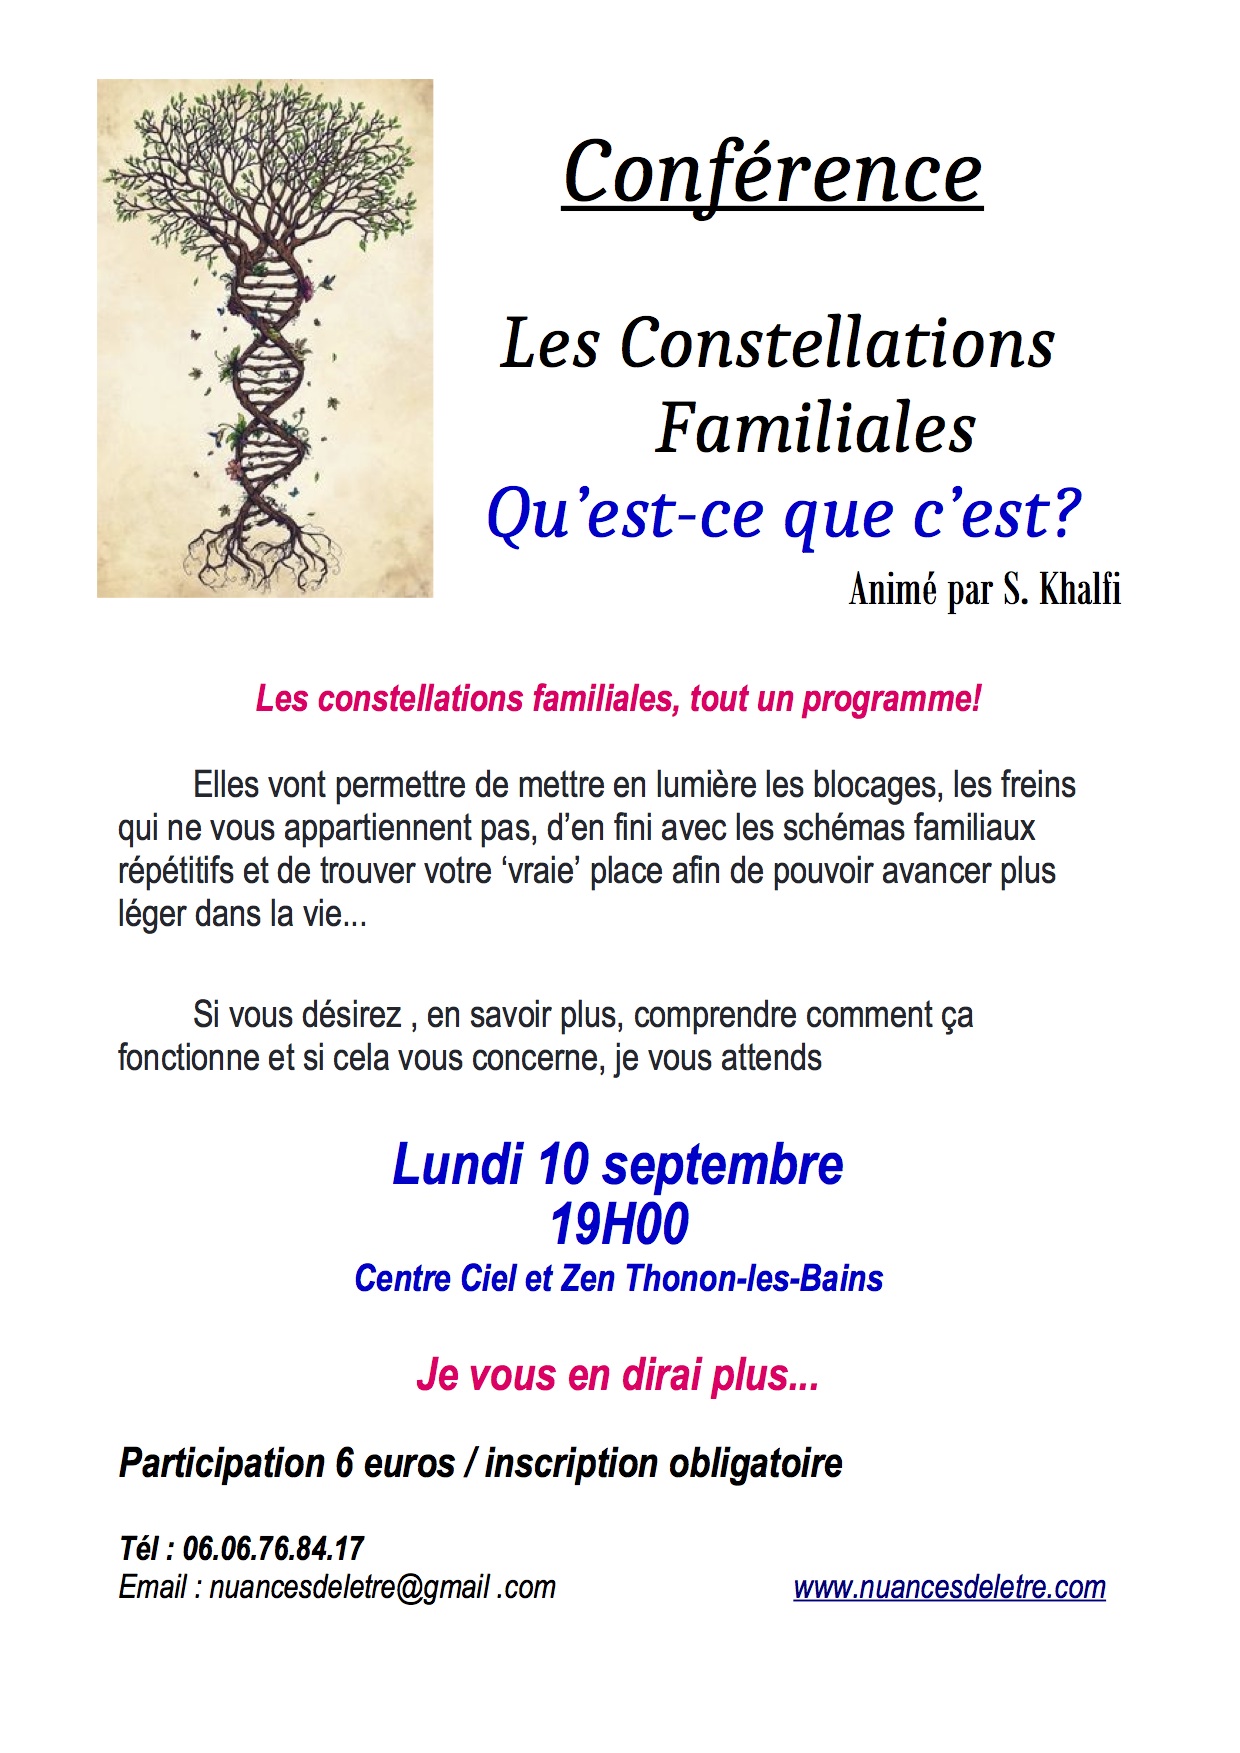 Conférence constellations 2